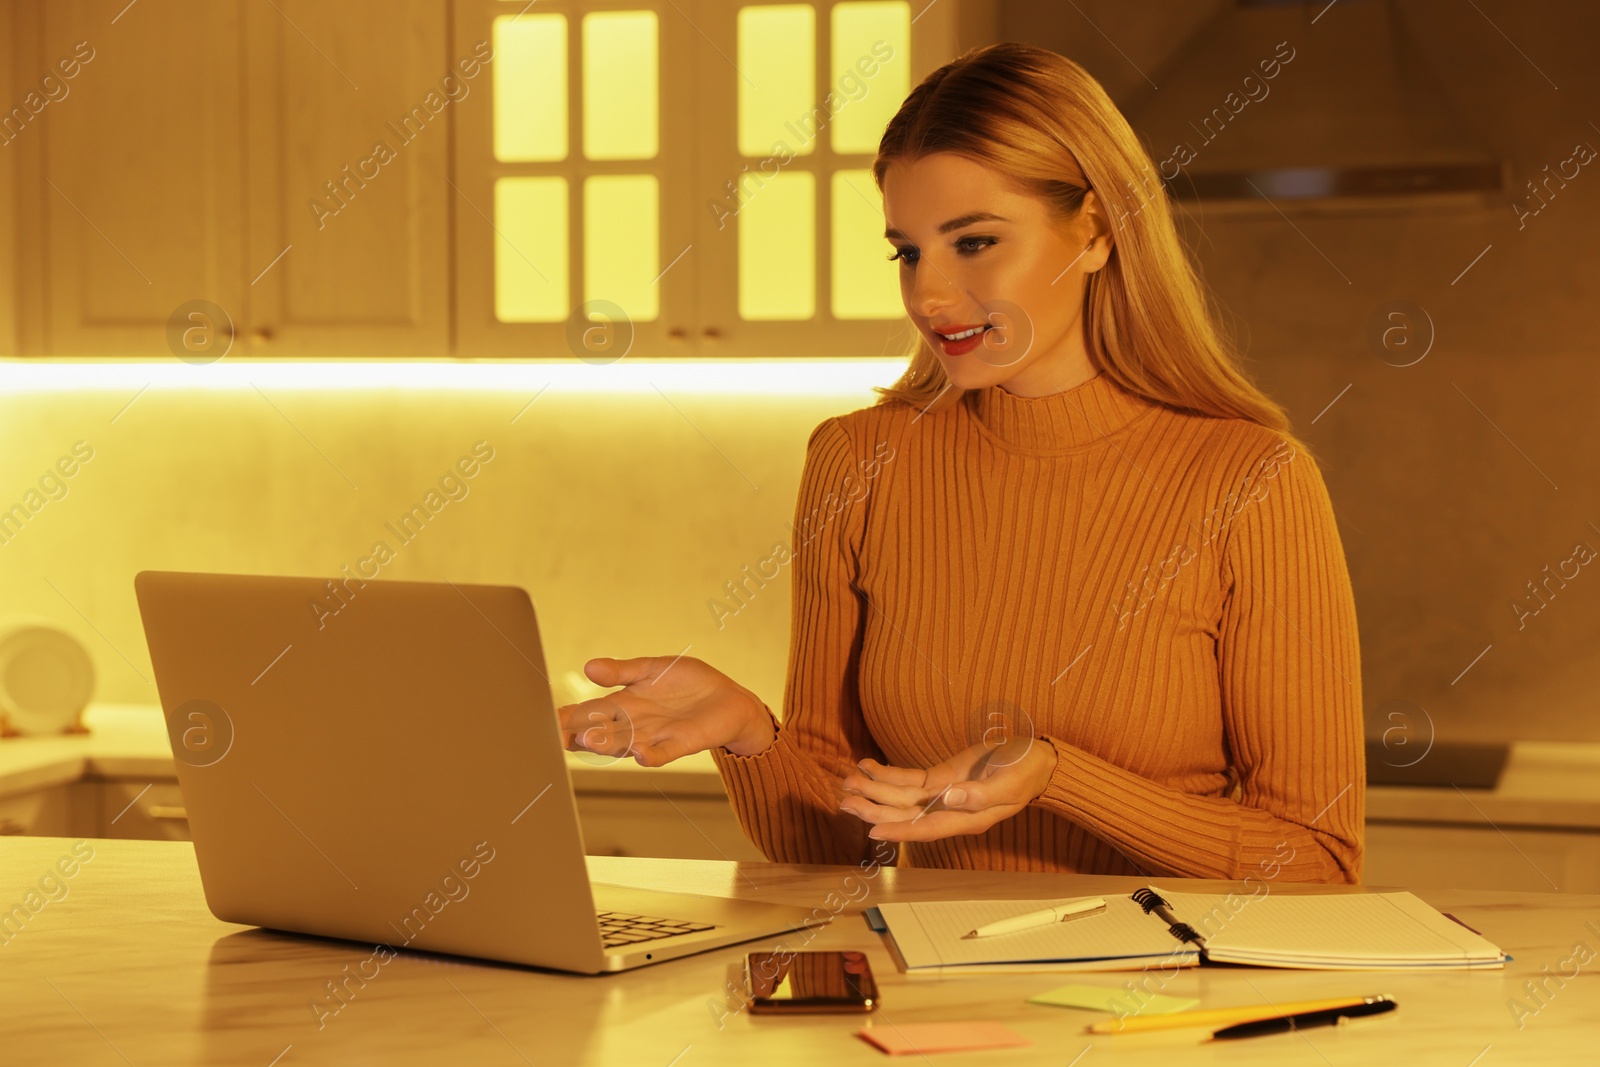 Photo of Home workplace. Woman talking by videochat on laptop at marble desk in kitchen